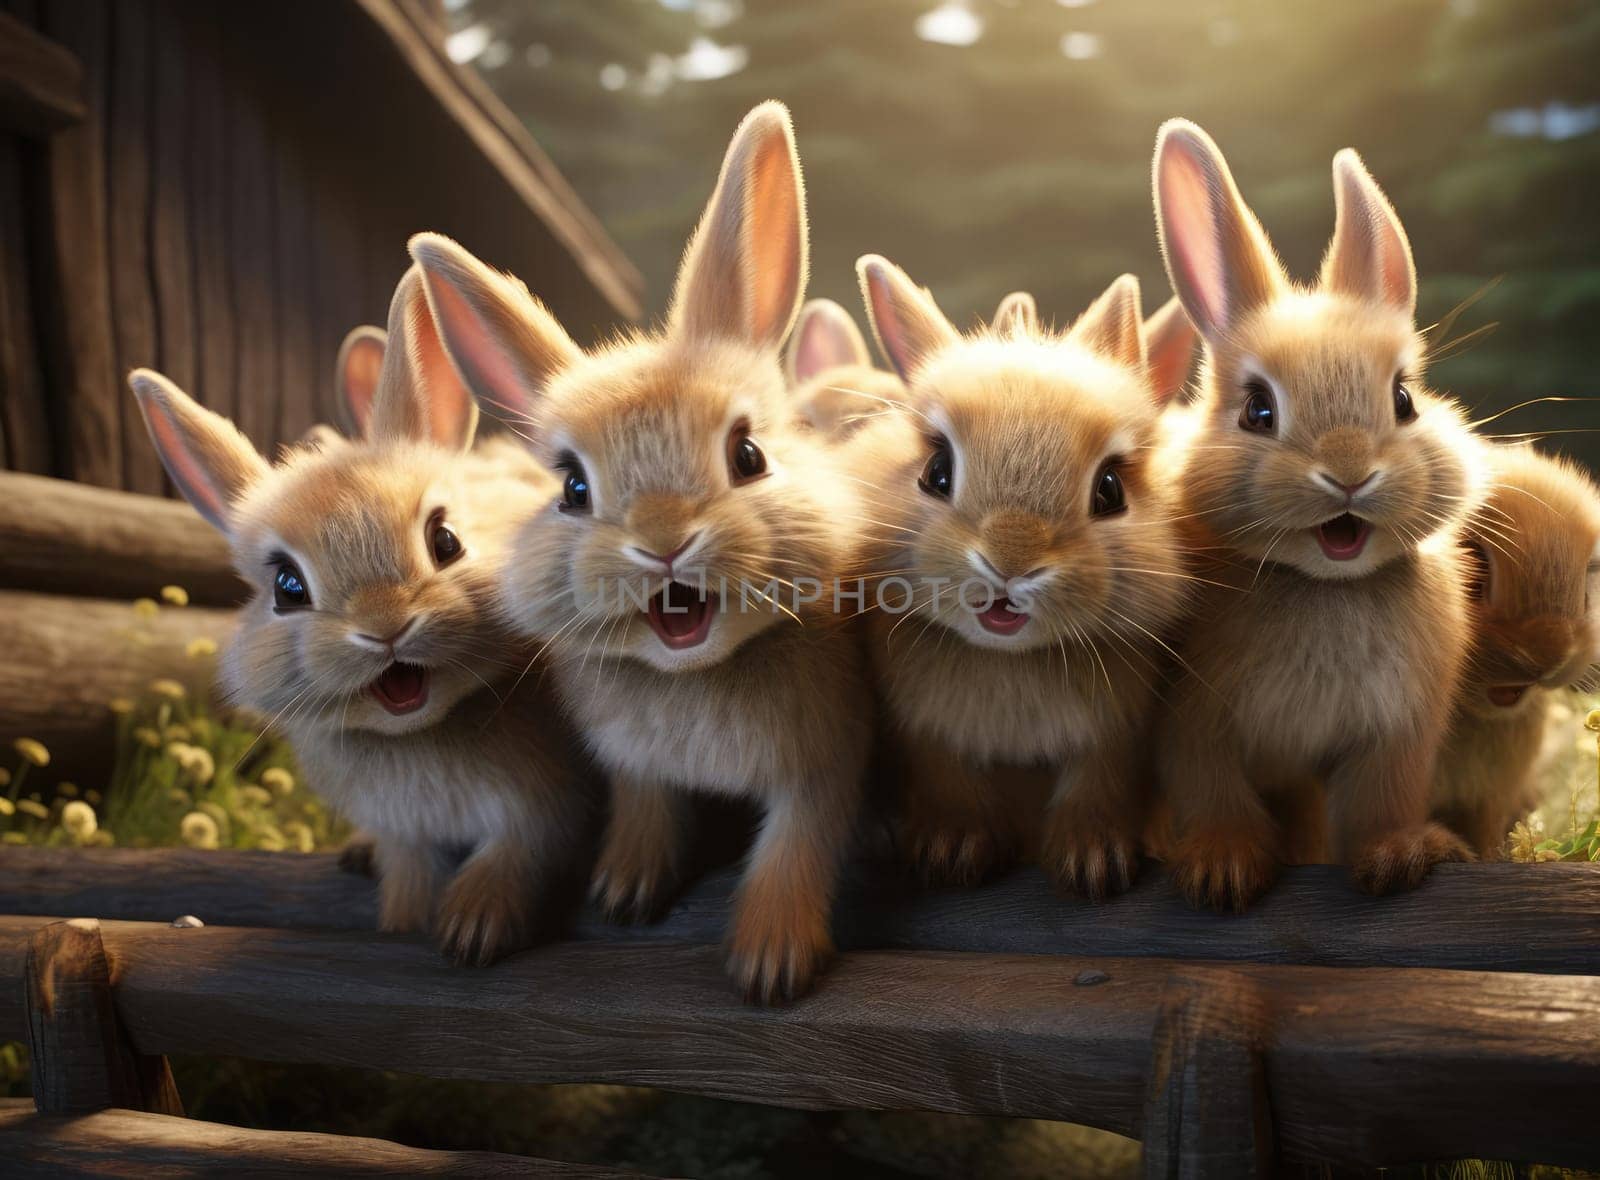 Several rabbits take a group selfie. Everyone is looking at the camera